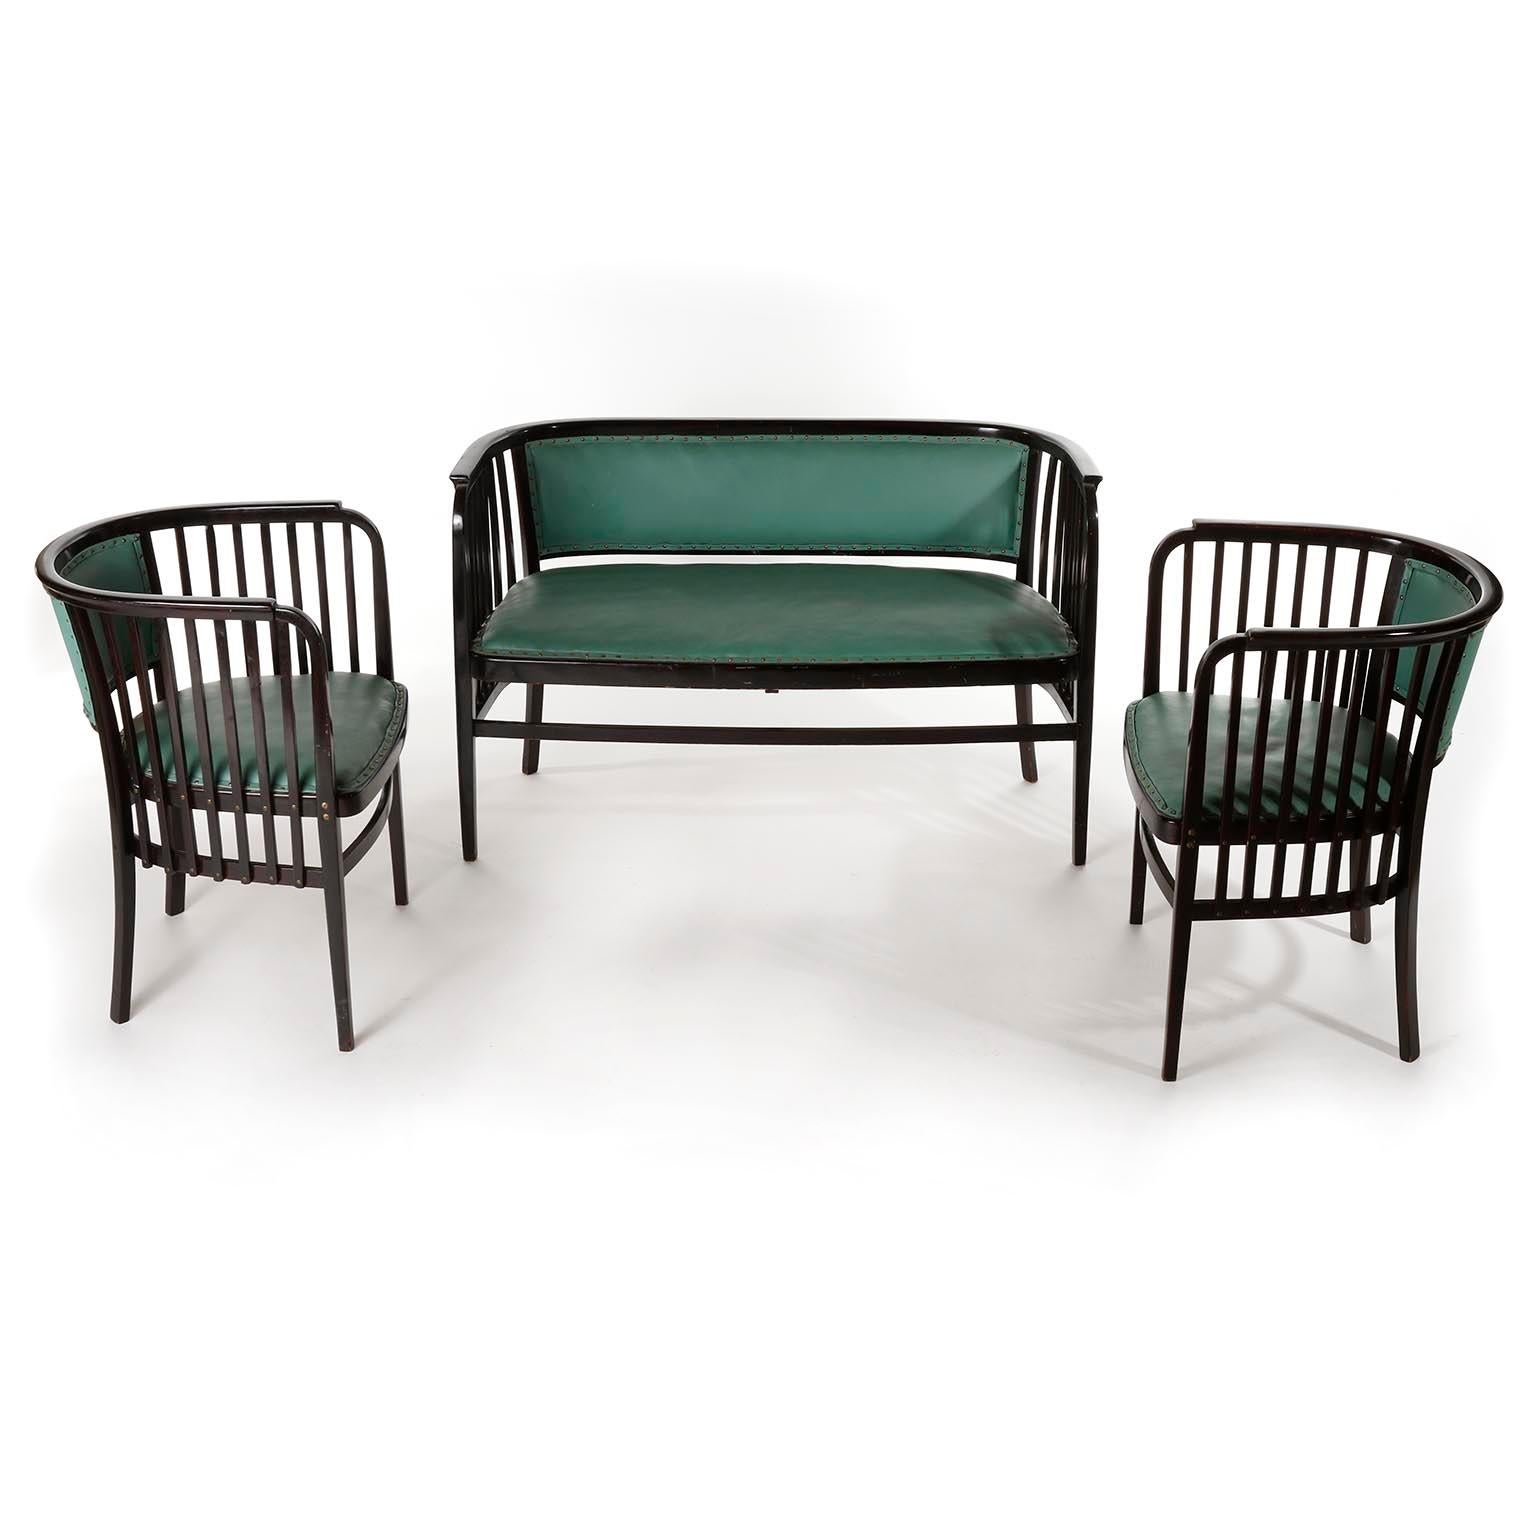 A fantastic bentwood set seating group designed by Marcel Kammerer and manufactured by Thonet, Austria, circa 1910.
The set contains of two armchairs and one bench or seete. They are made of dark or almost black stained beech wood in mahogany tone